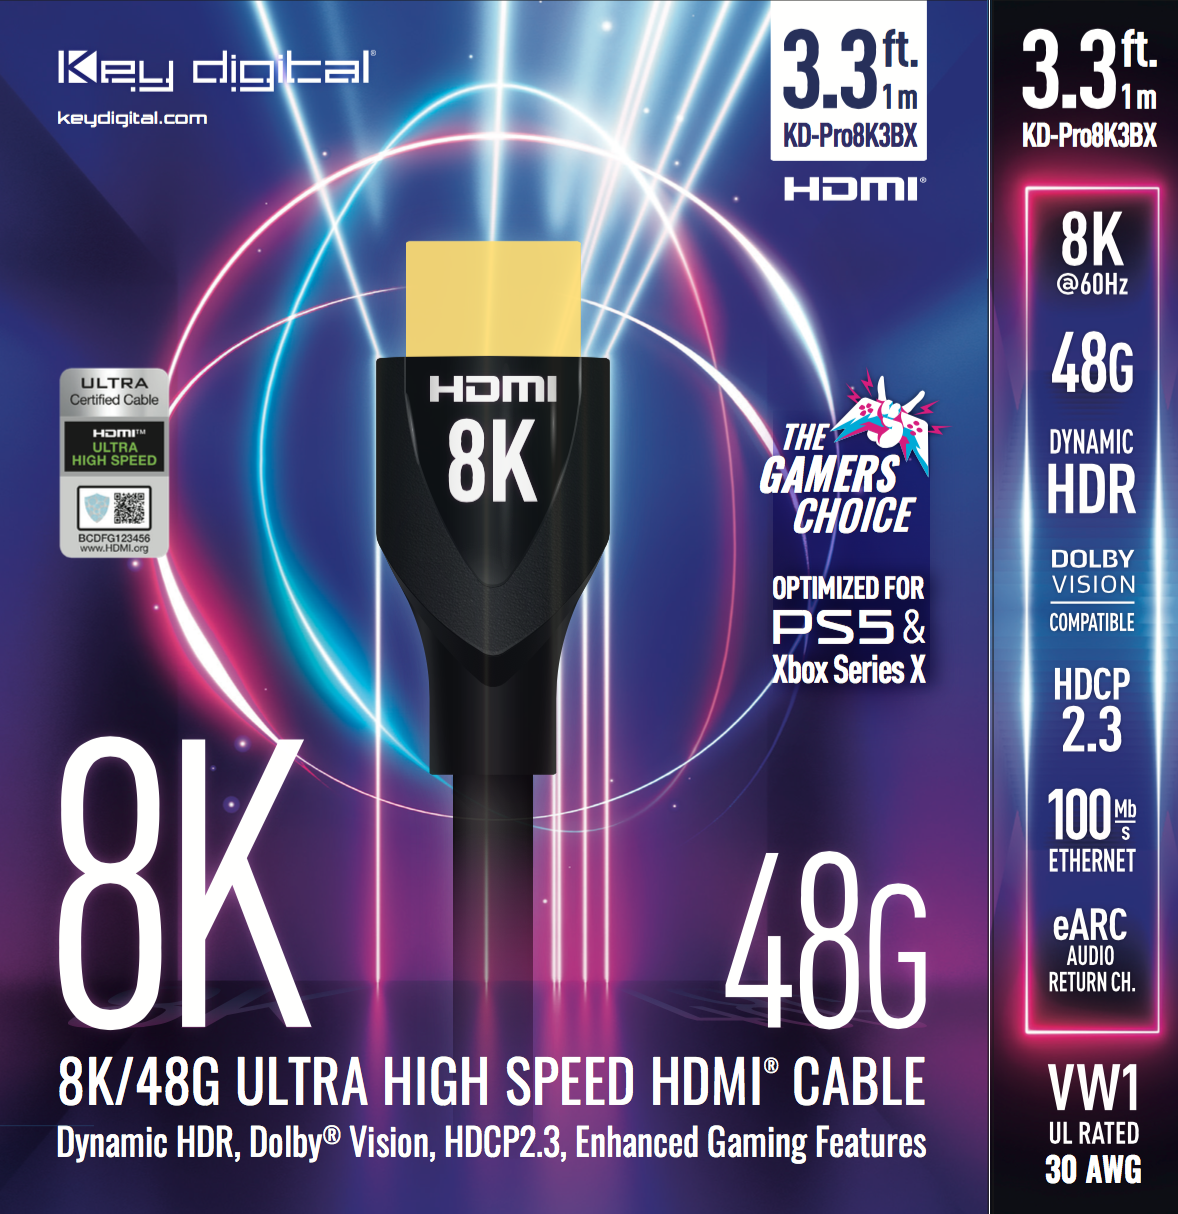 8K Ultra High Speed HDMI Cable from Key Digital